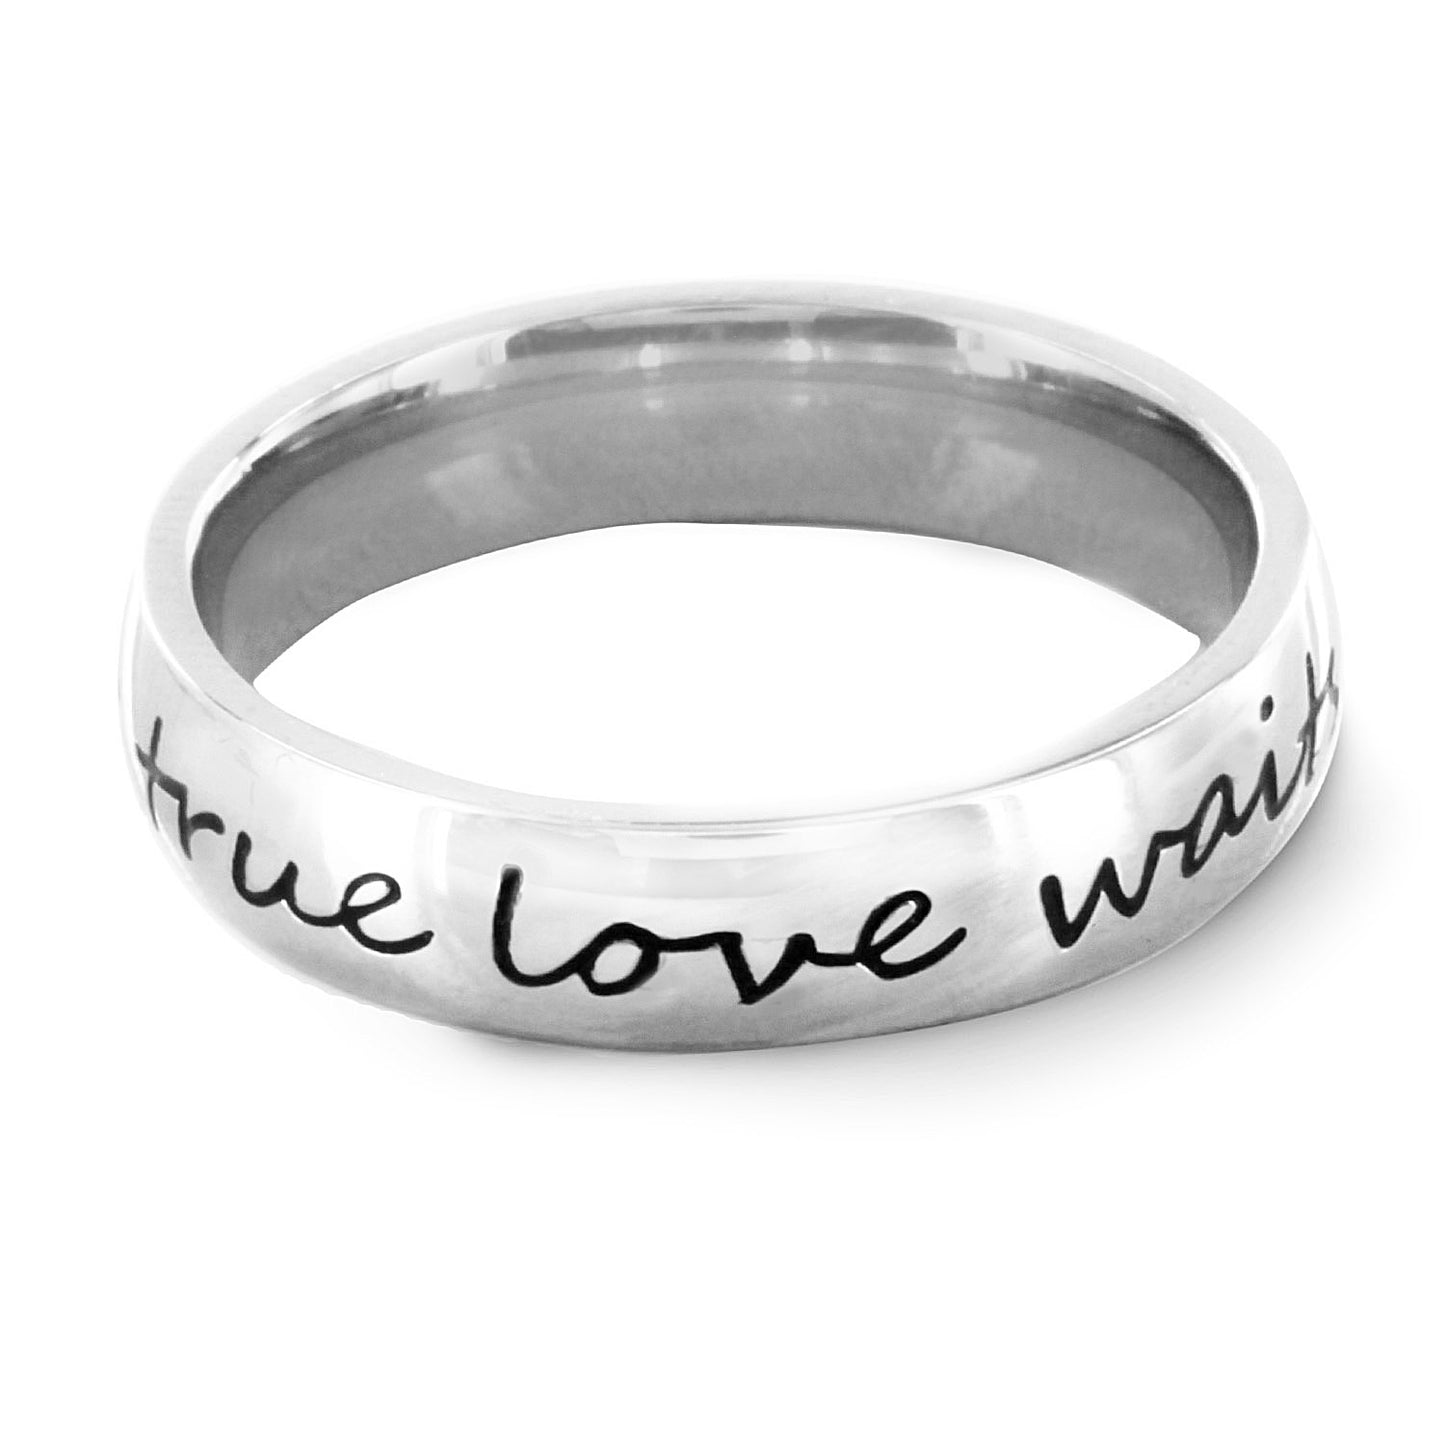 Polished 'True Love Waits' Cursive Script Stainless Steel Ring (4mm)